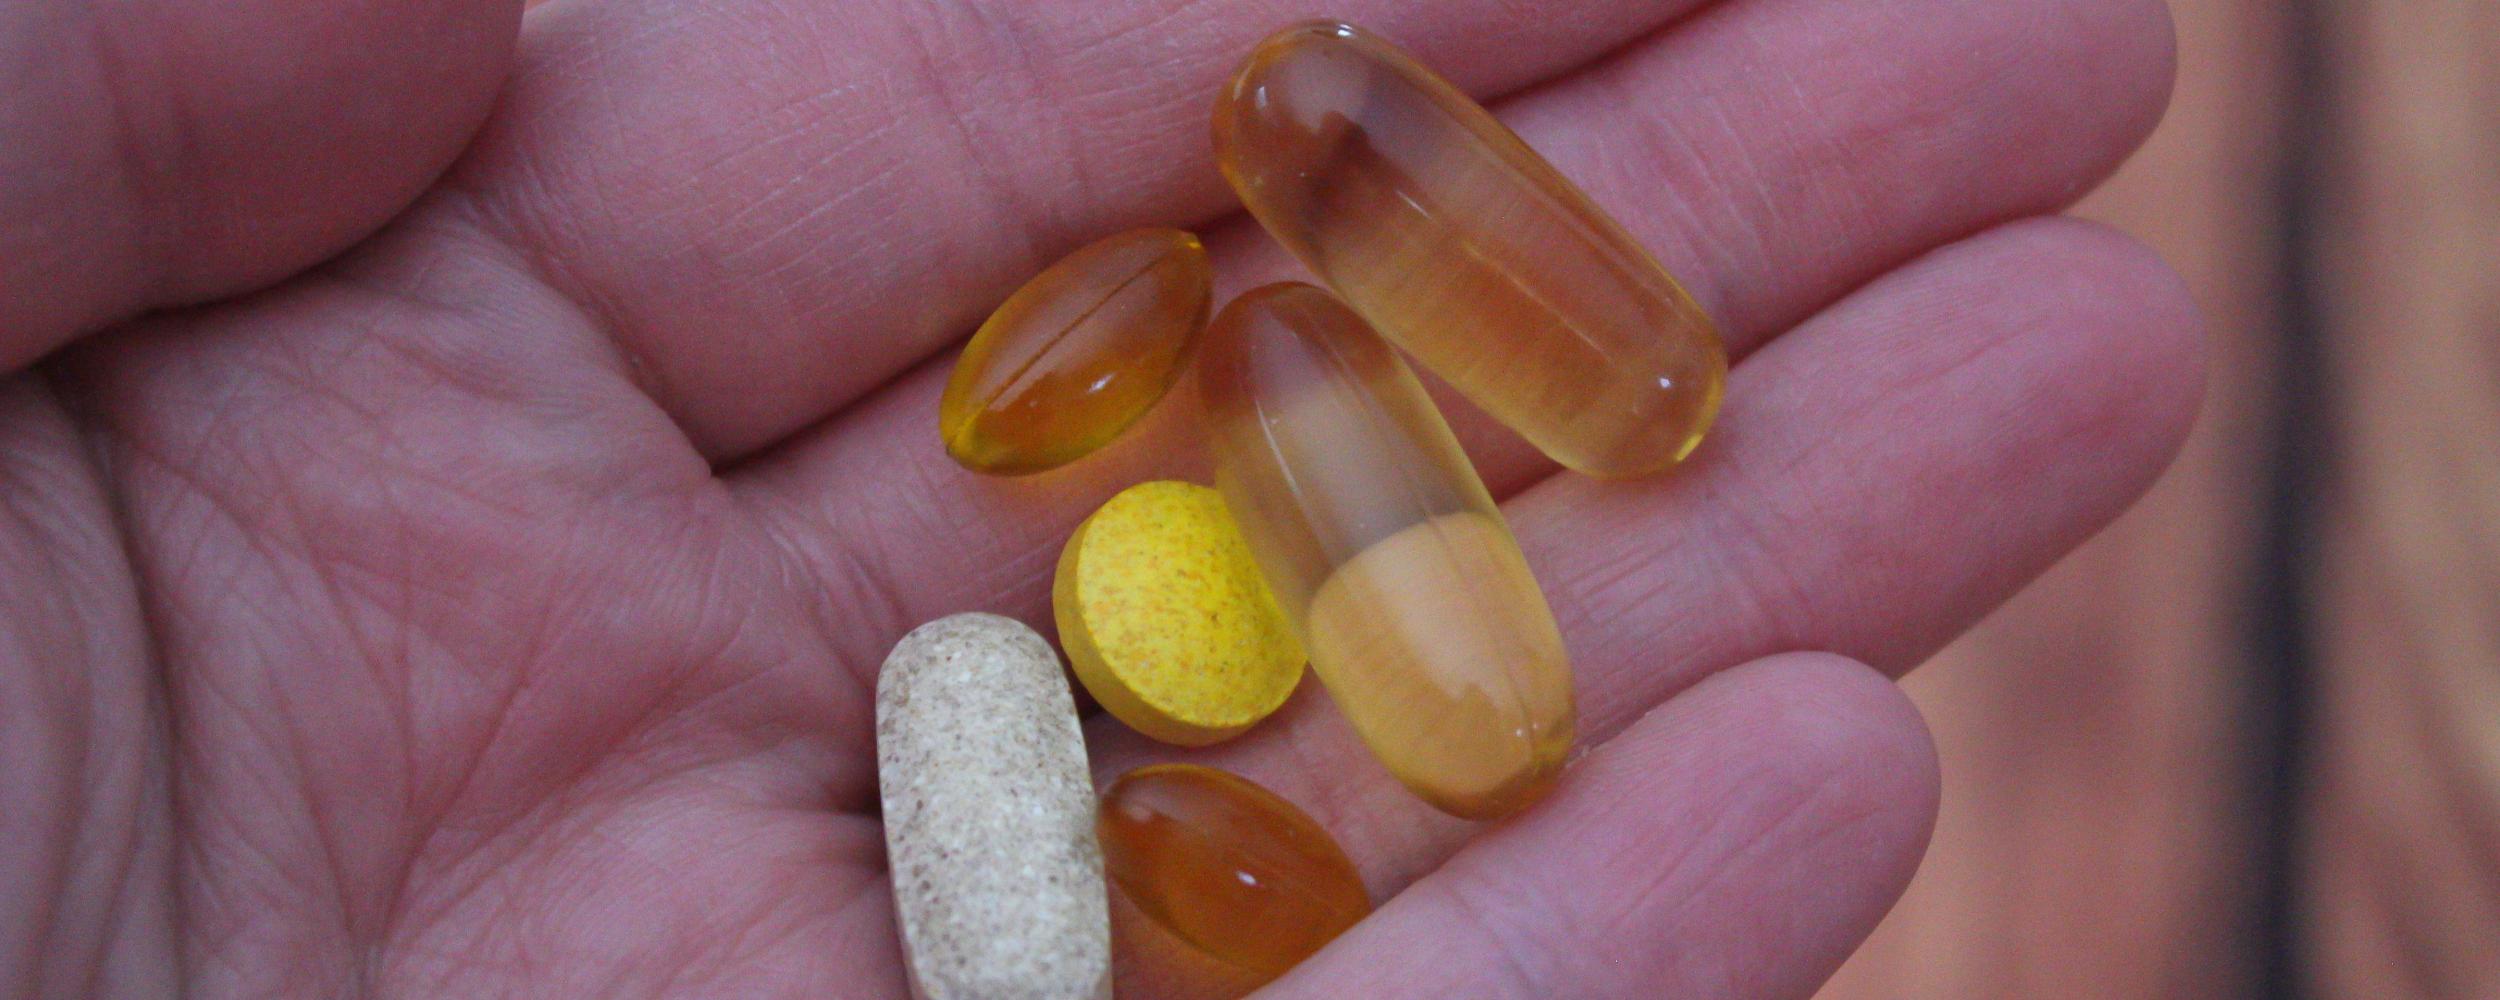 picture of a hand holding different pills and vitamins